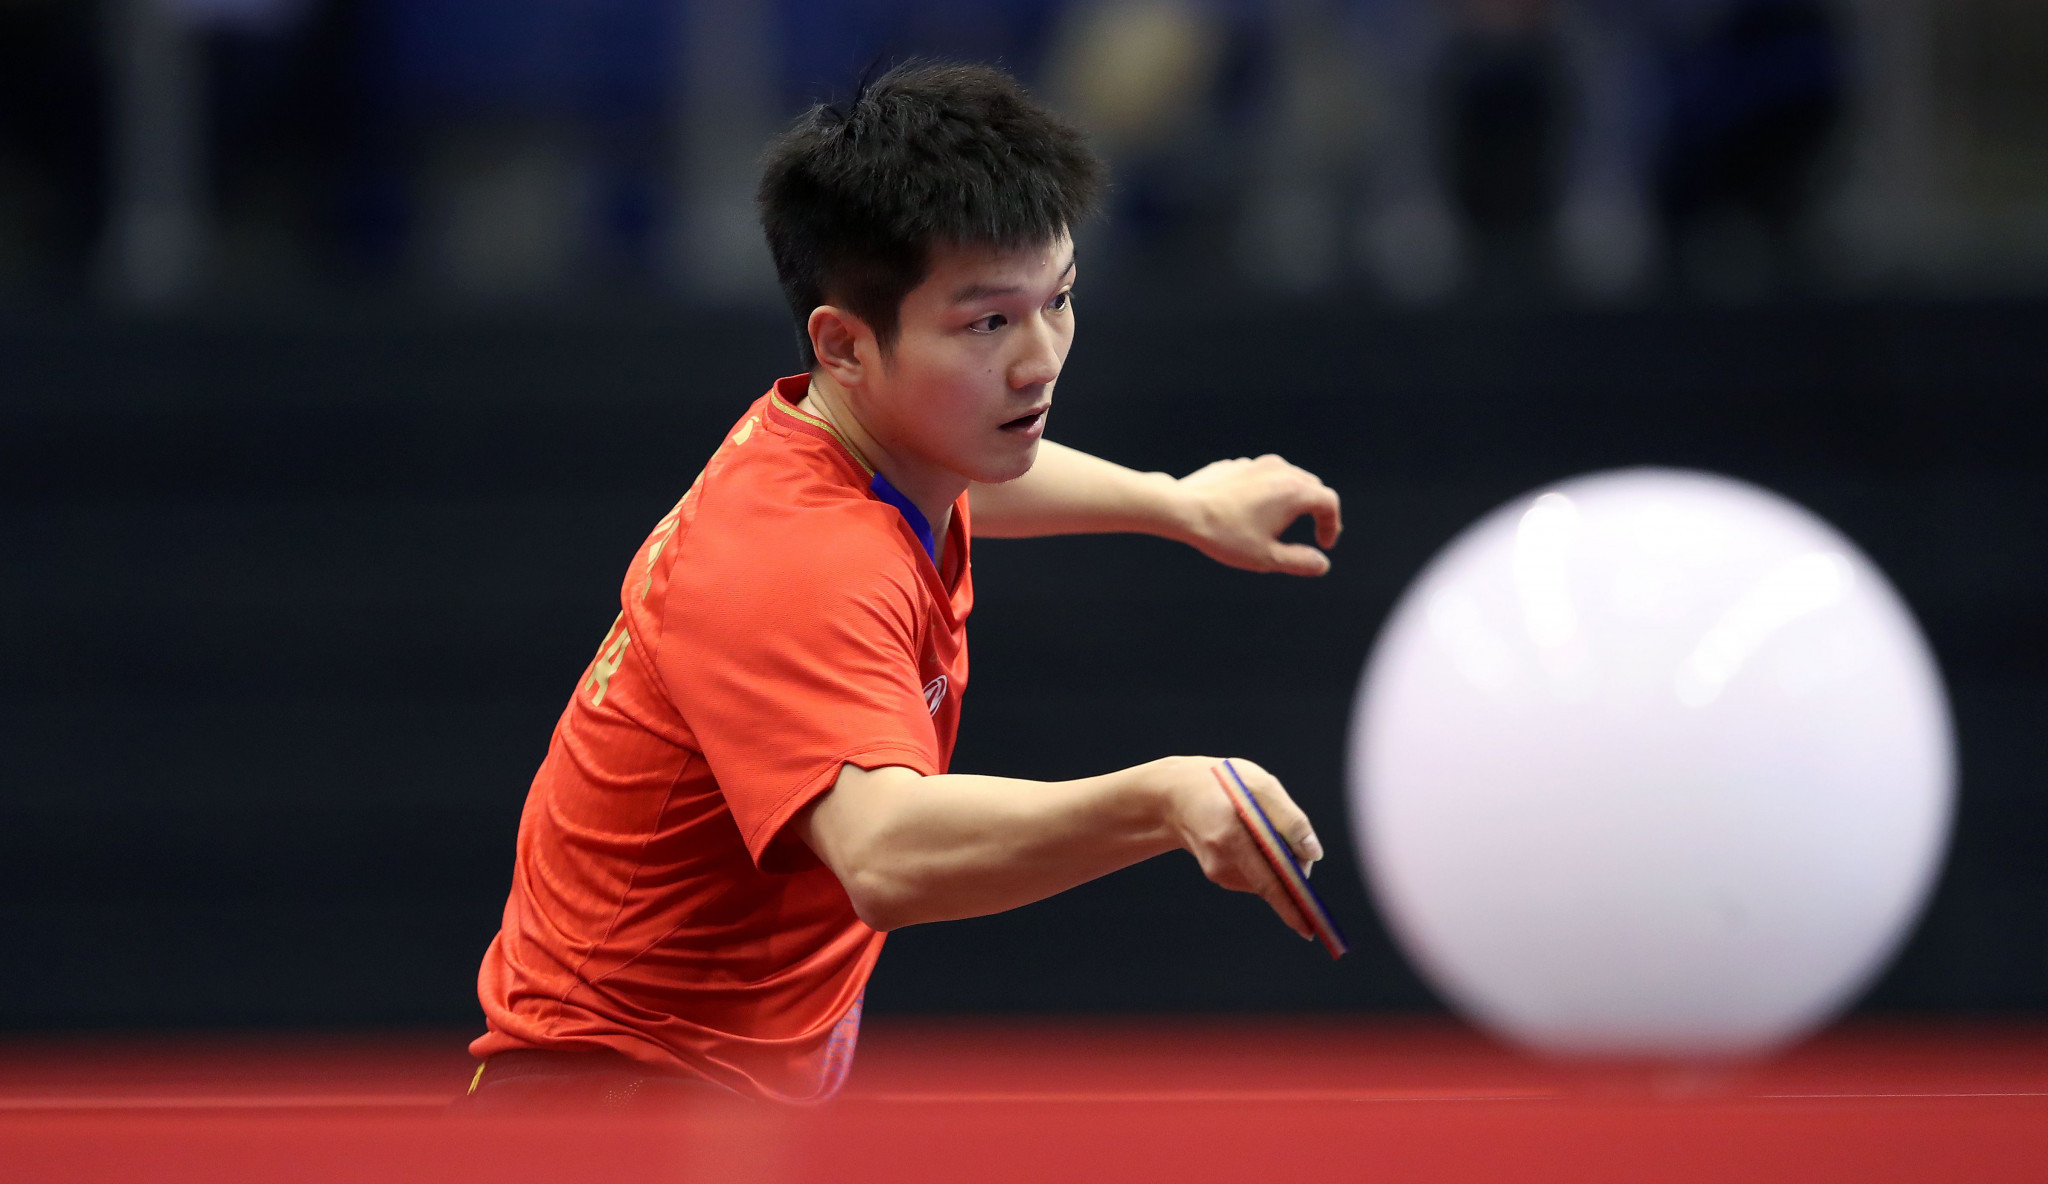 Fan returns to top spot prior to ITTF freezing world rankings